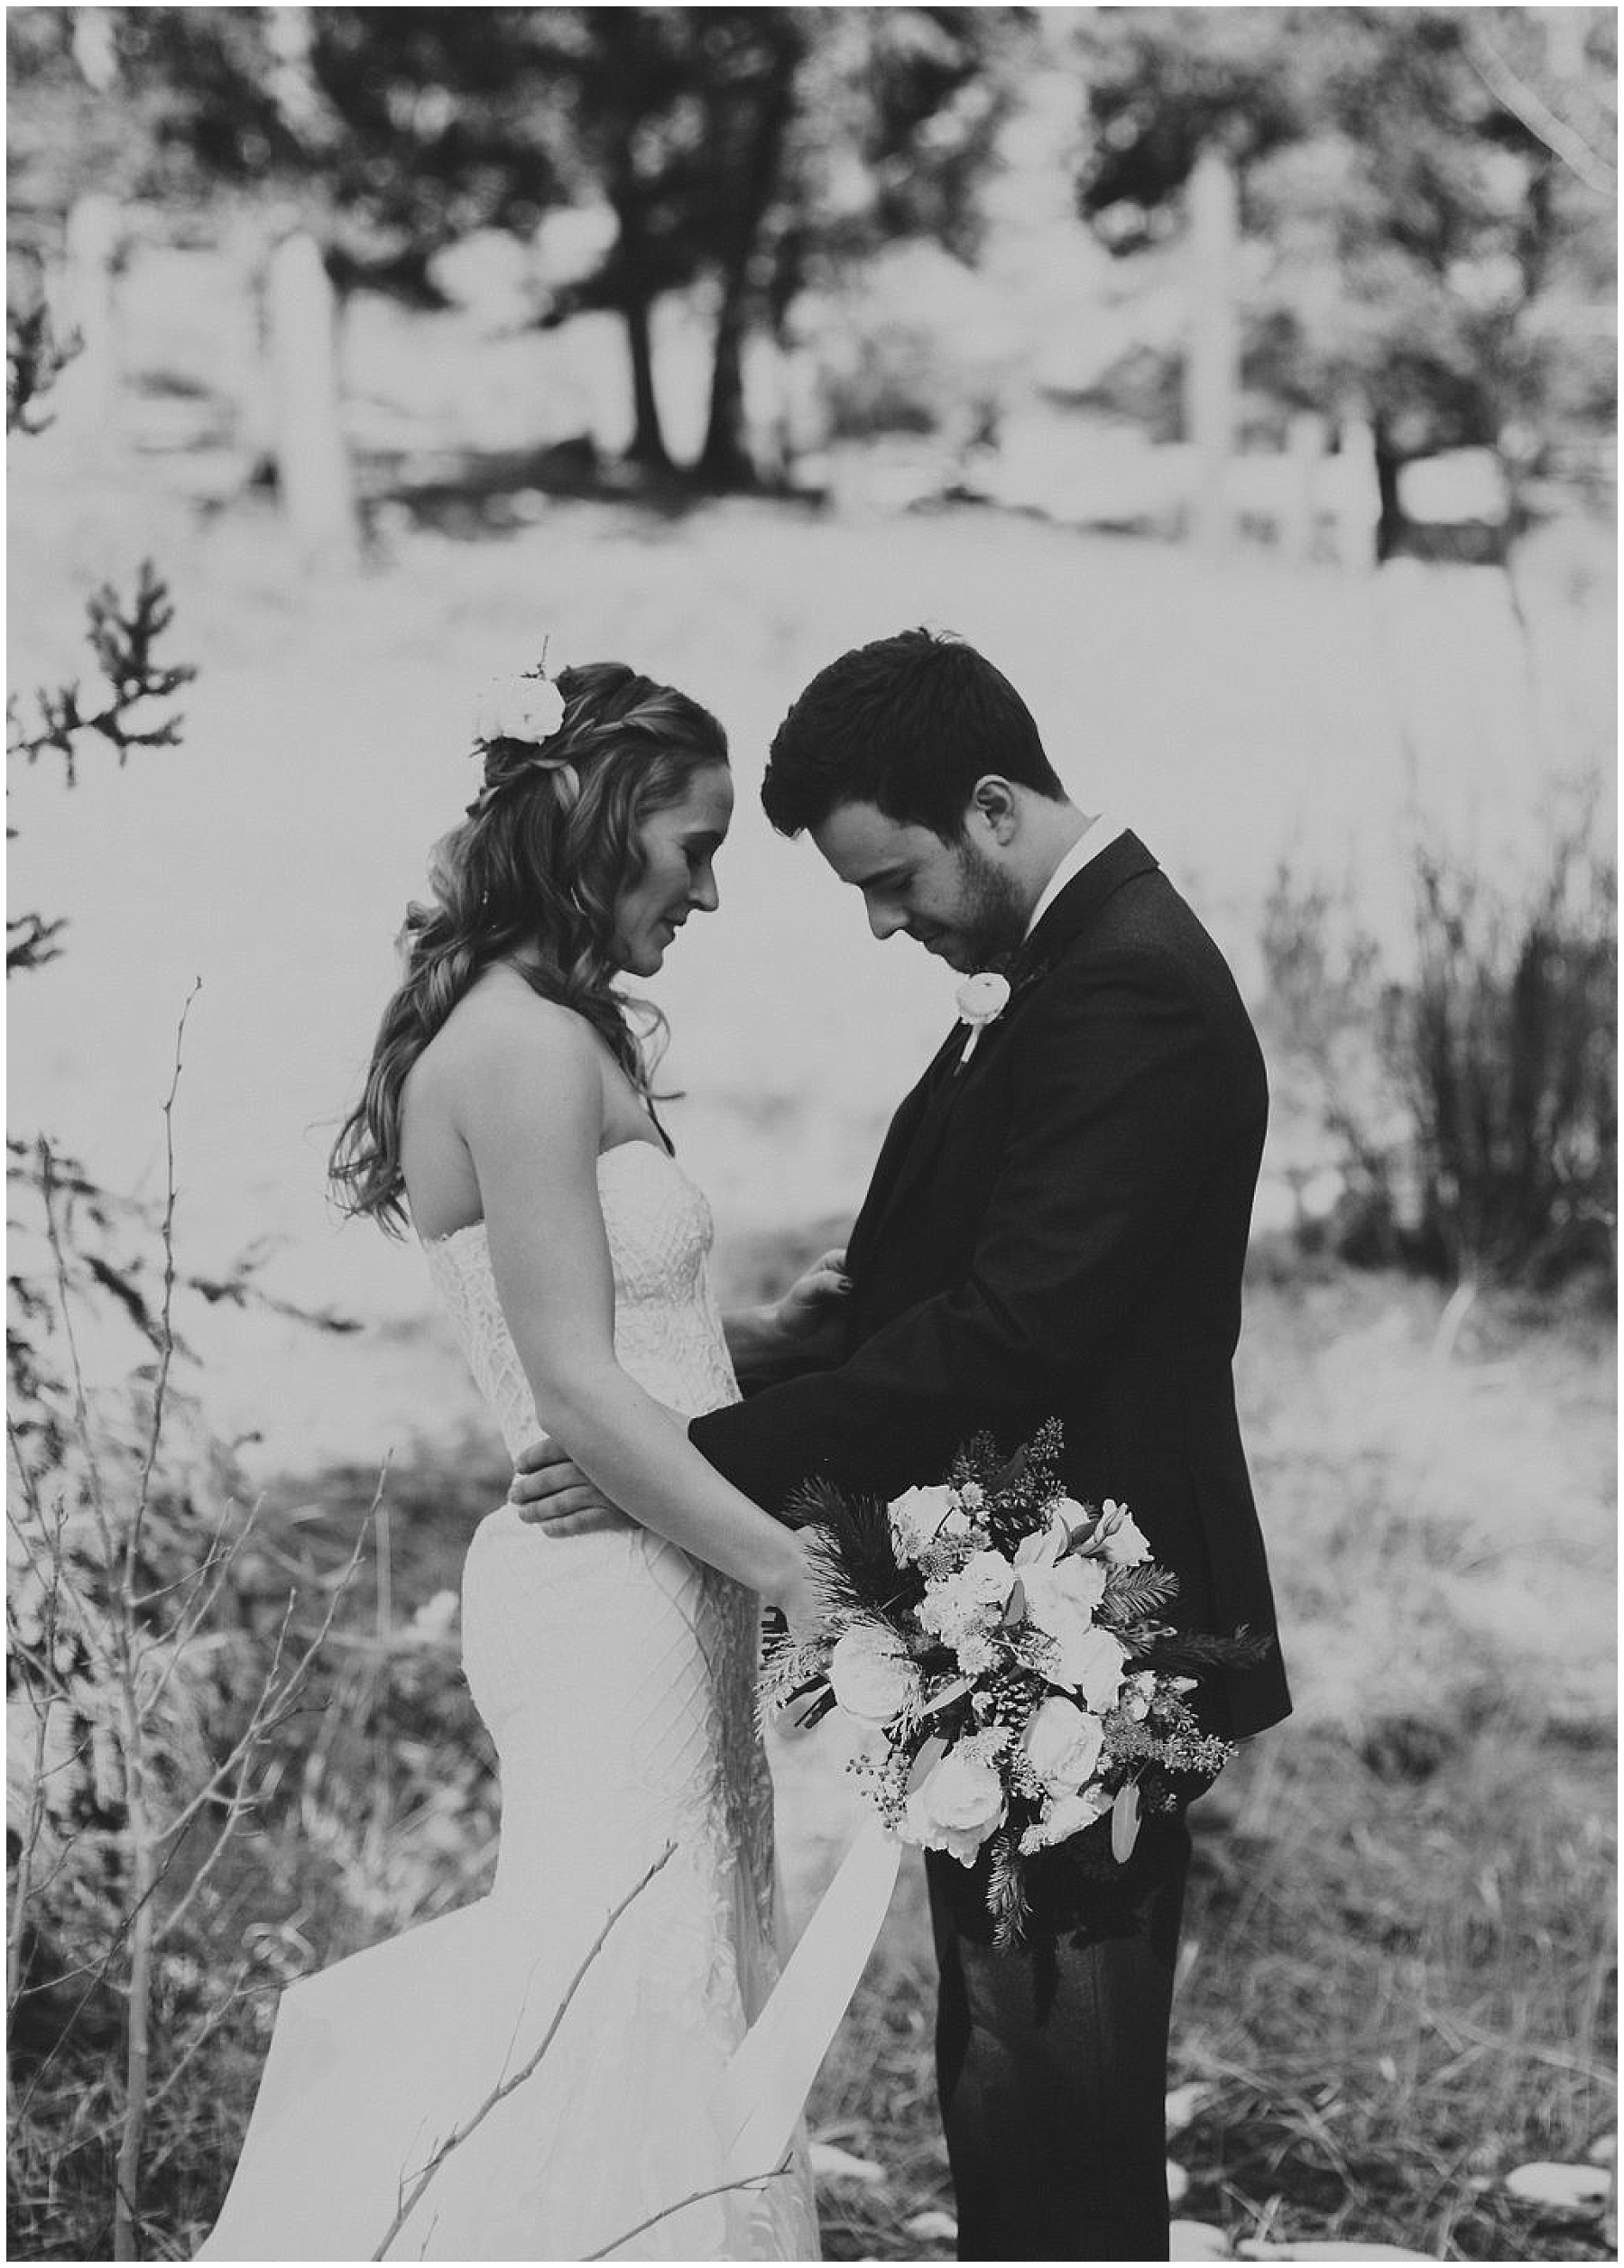 Katesalleyphotography-109_Haley and Dan get married in Estes Park.jpg